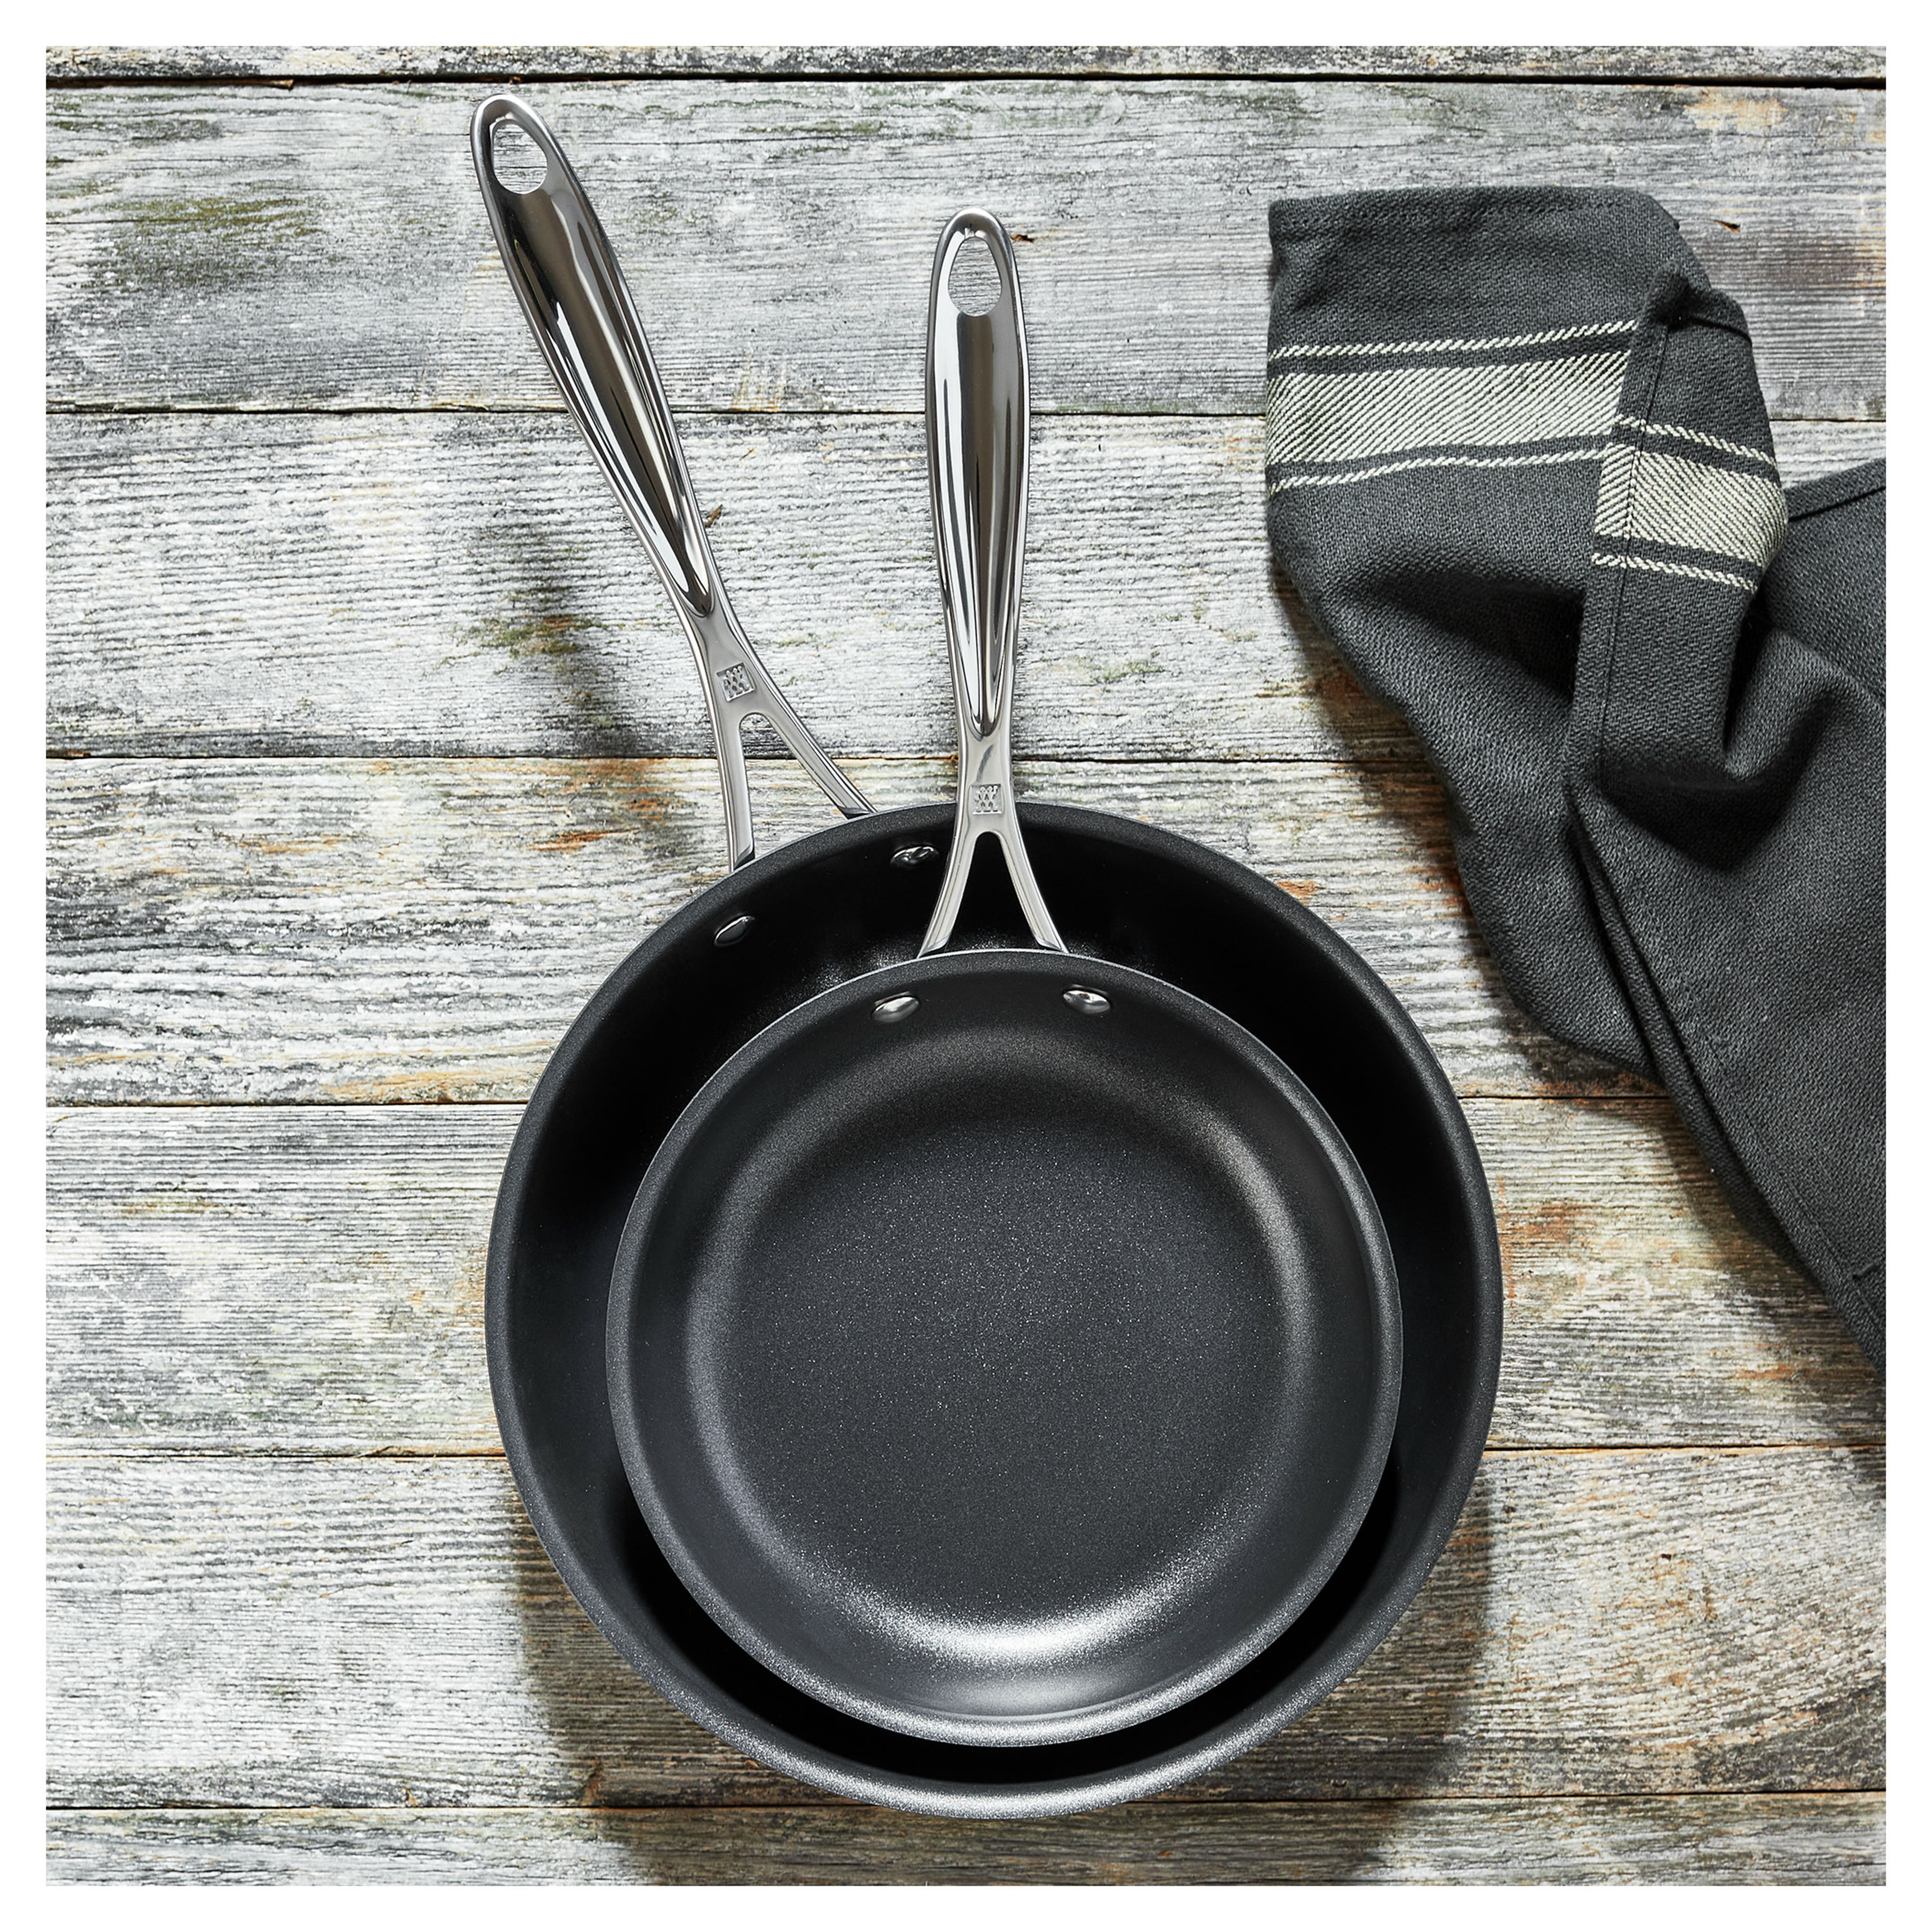 ZWILLING J.A. Henckels Clad Xtreme Ceramic Fry Pans, Set of 2 + Reviews